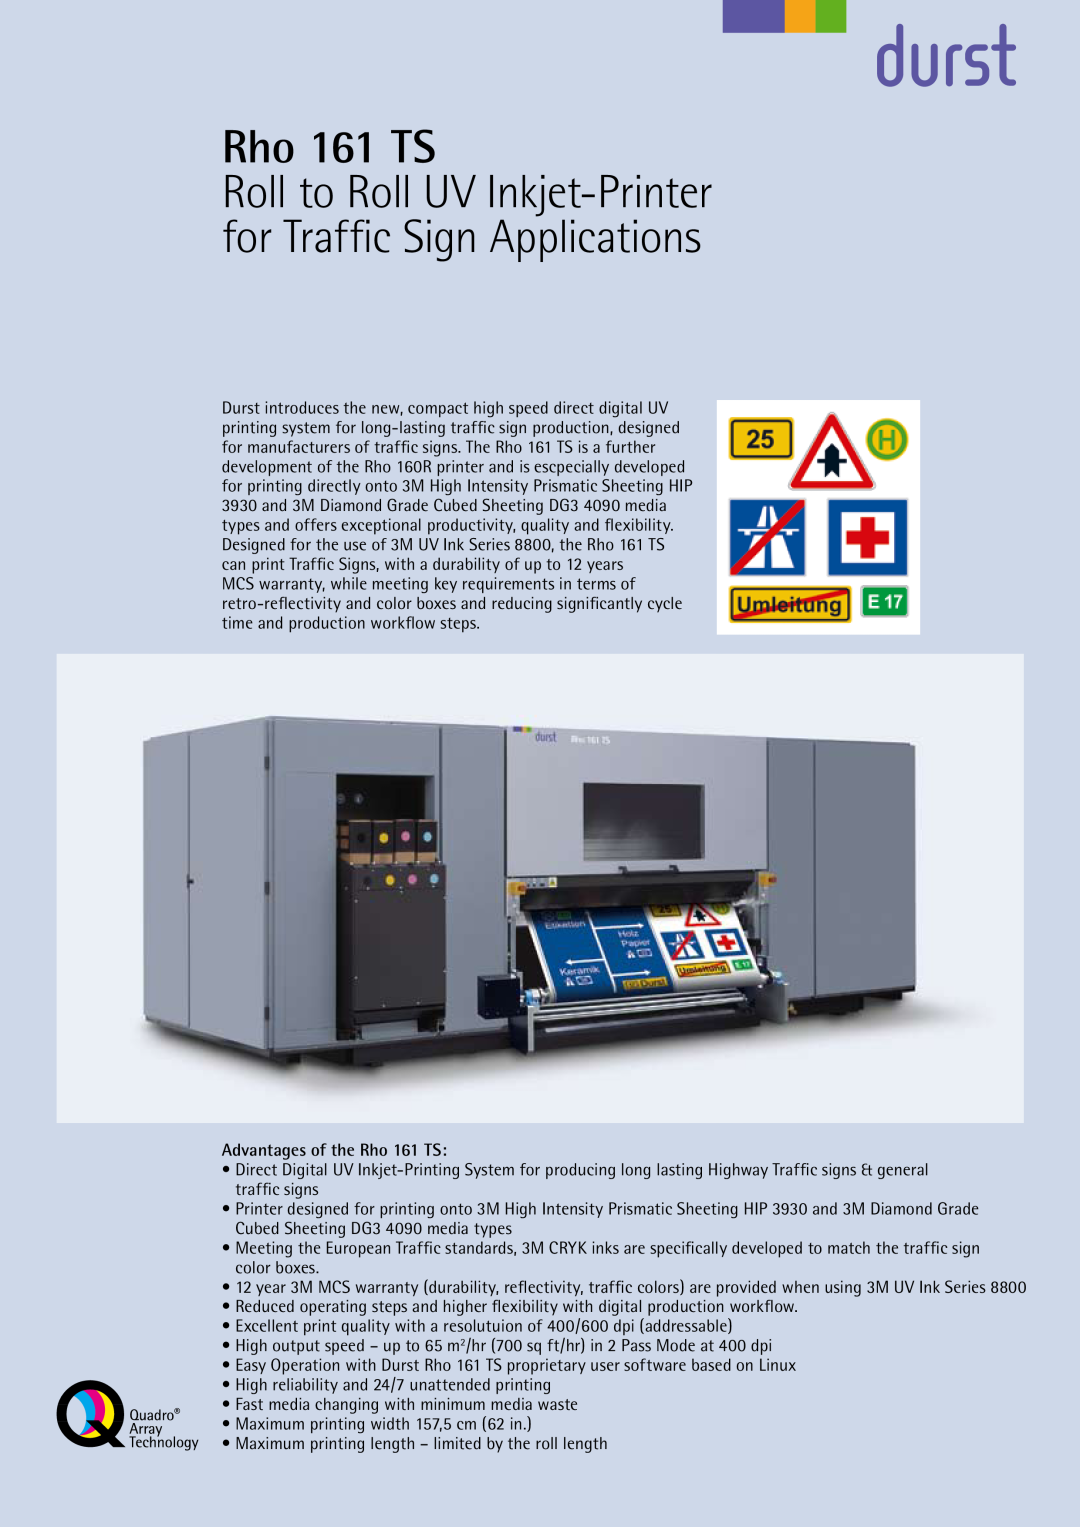 Durst warranty Advantages of the Rho 161 TS, Roll to Roll UV Inkjet-Printer for Traffic Sign Applications 